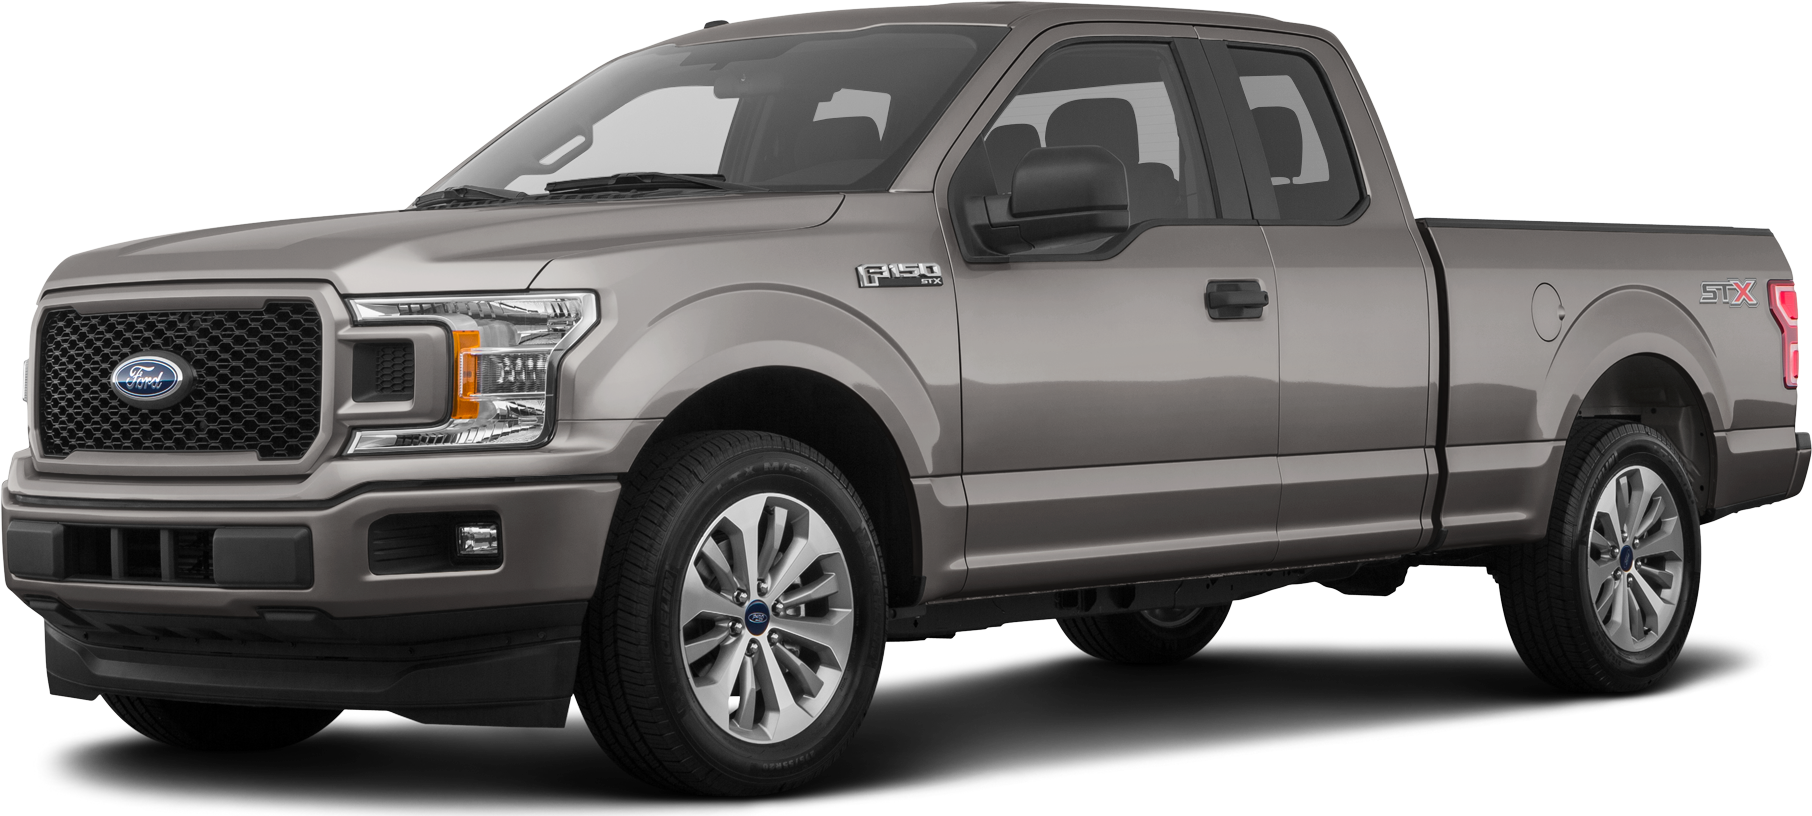 2019 Ford F150 Value Ratings